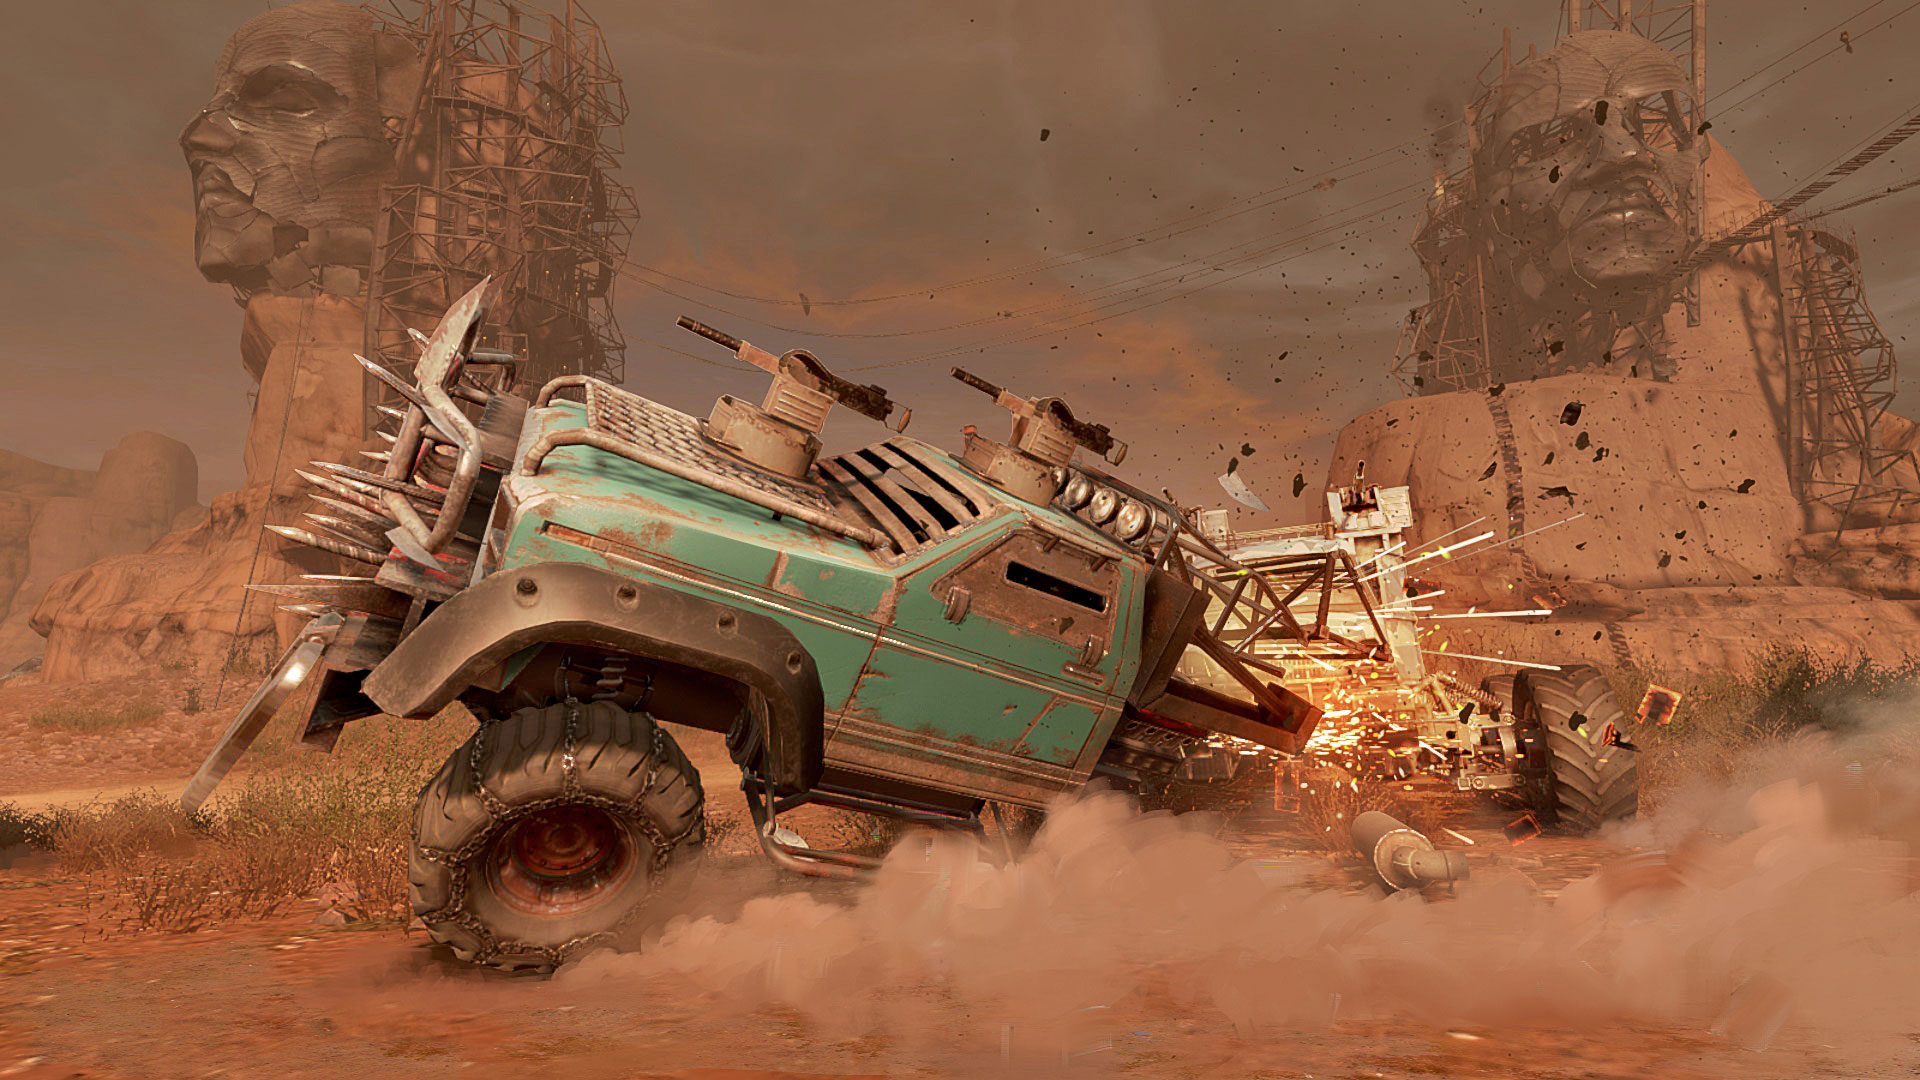 Vehicular MMO “Crossout” Gets New Map, Story Arc